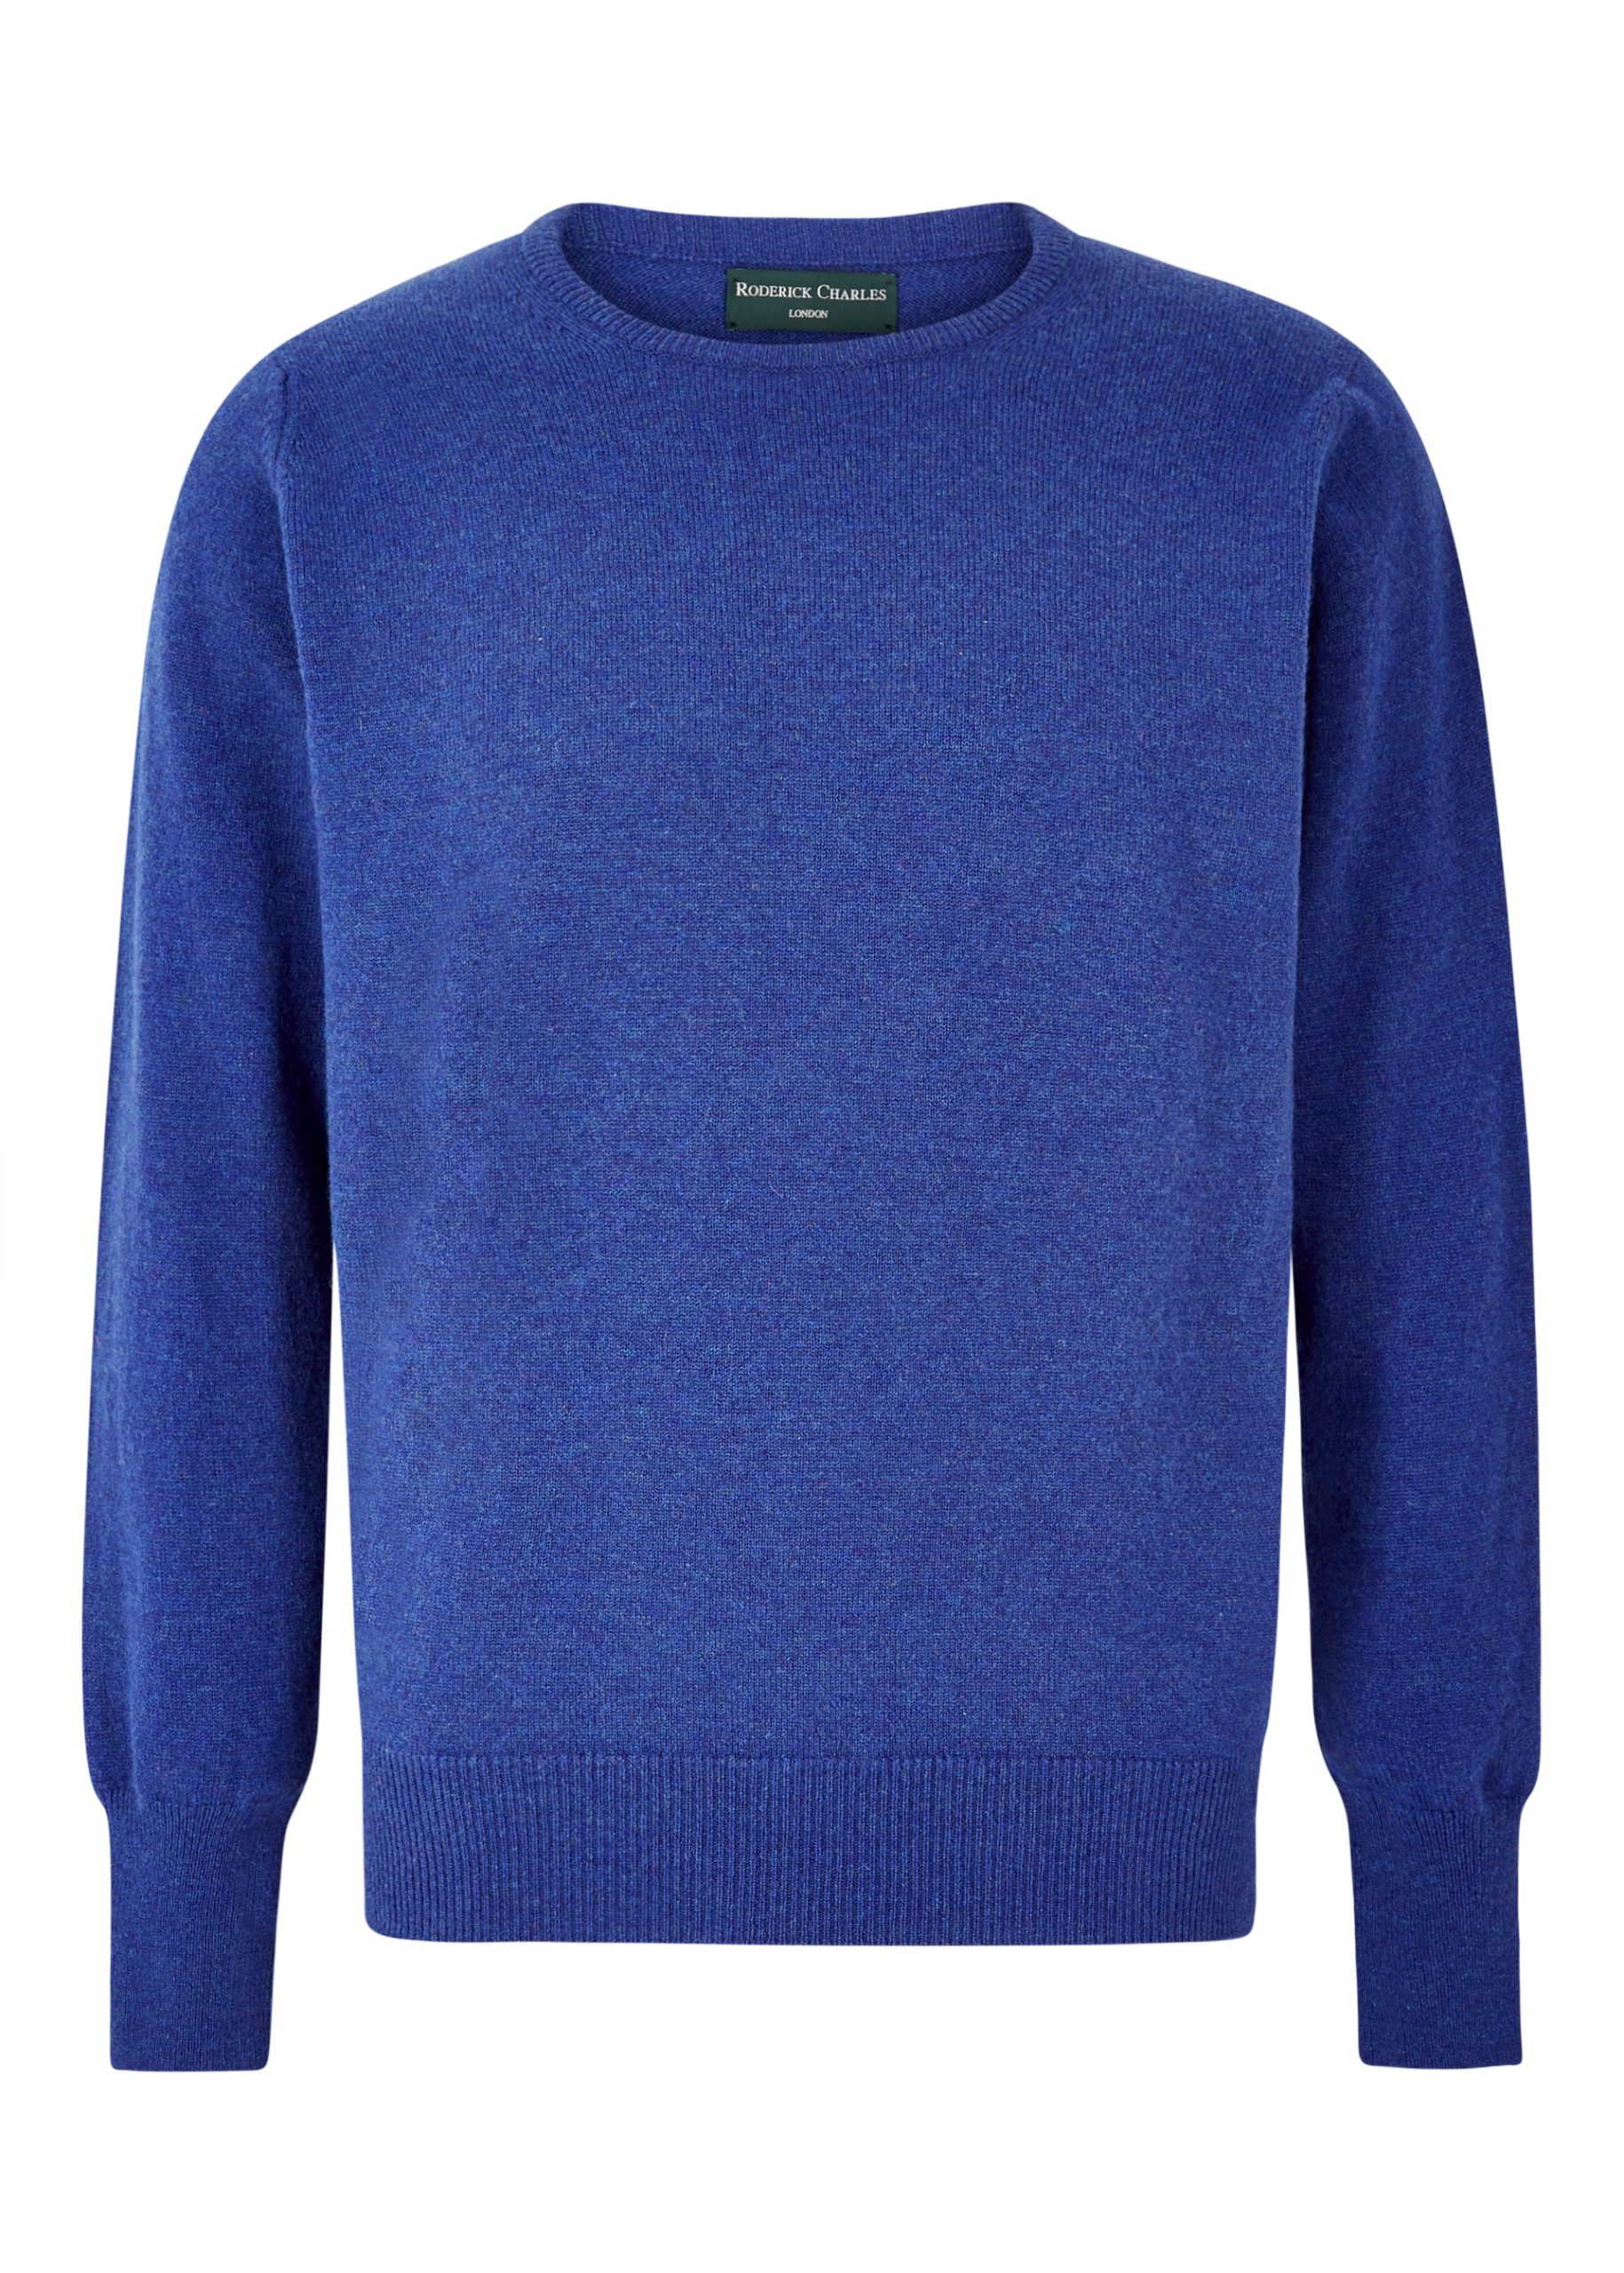 Men’s Persian lambswool crew neck styled with a shirt and moleskin trousers